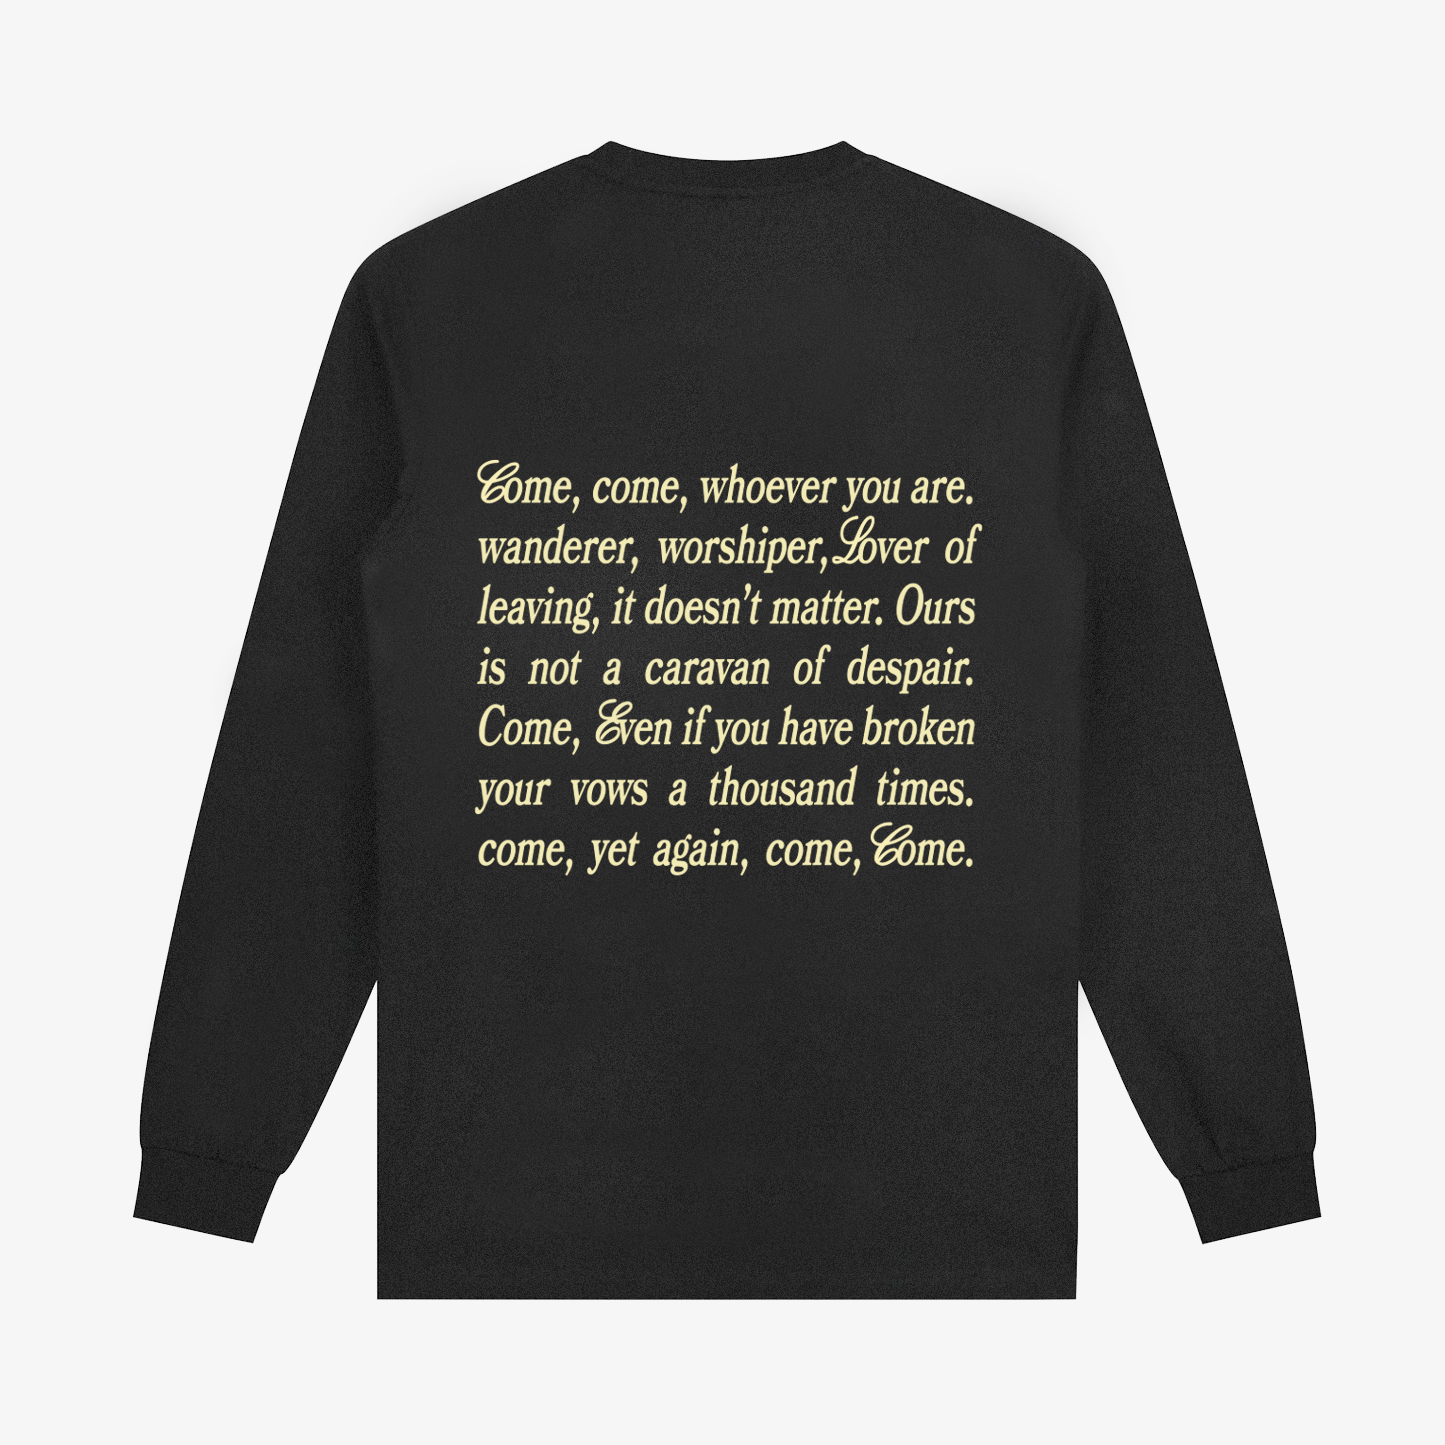 Come Home Long Sleeve Tee - Washed Black